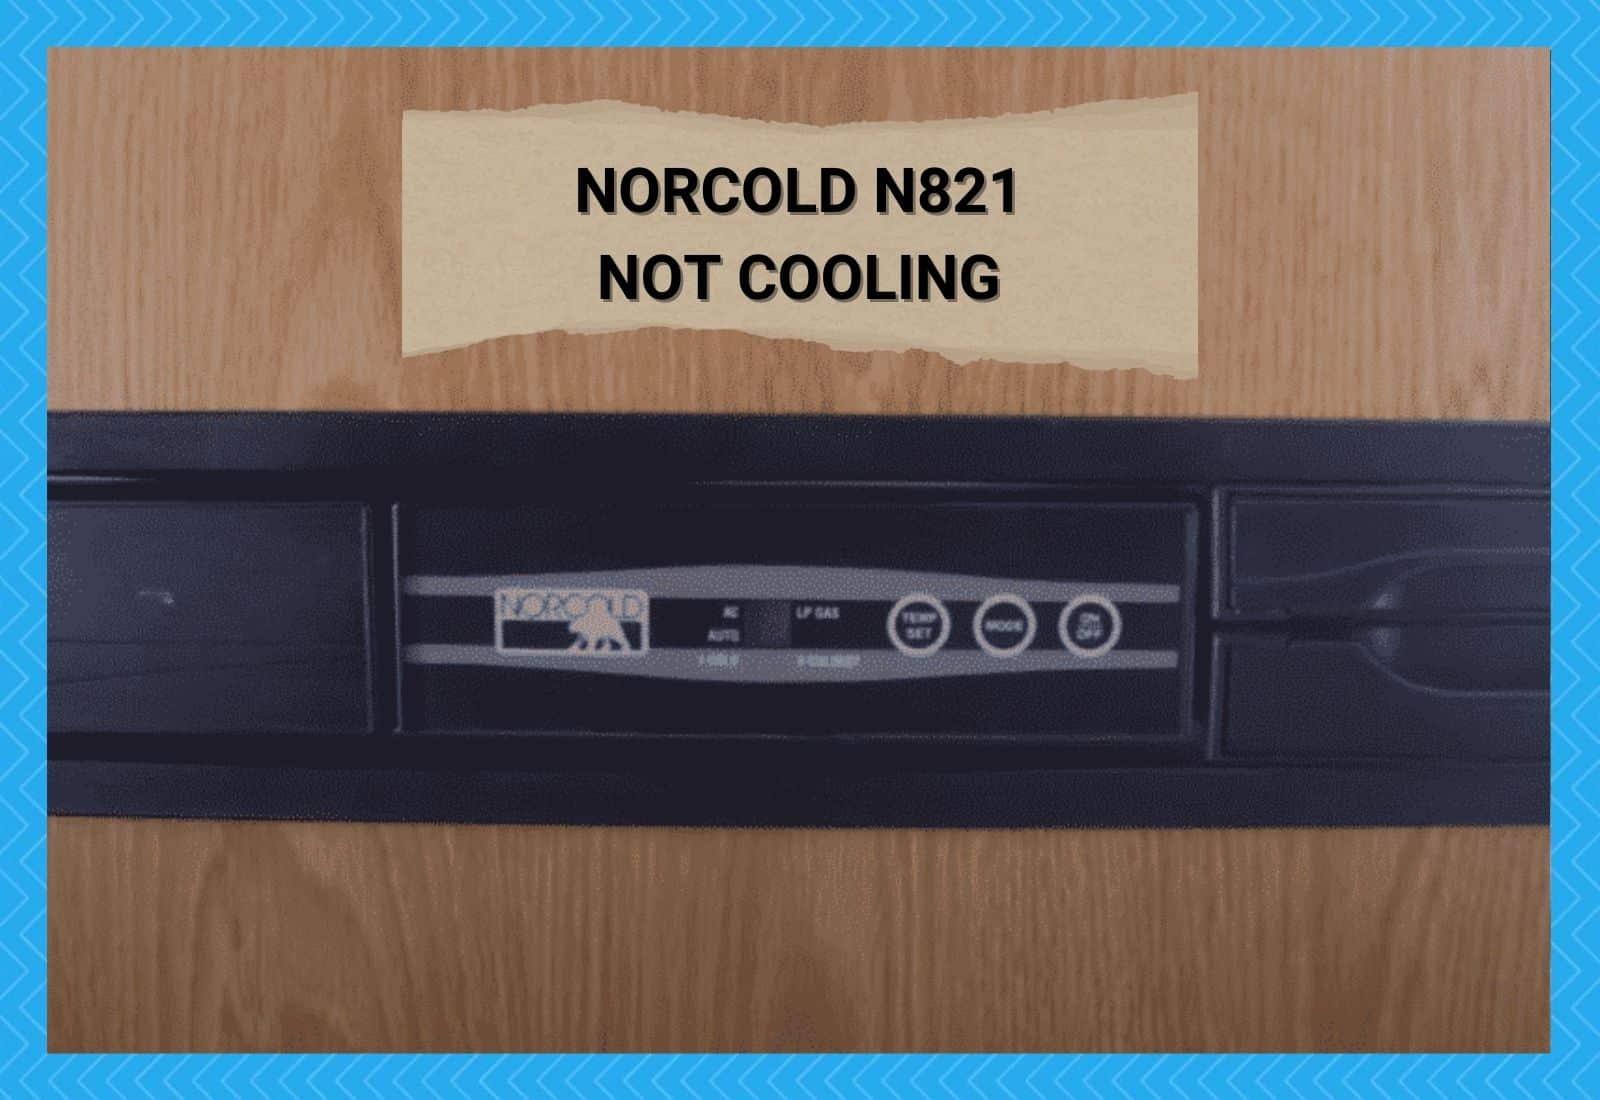 Norcold N821 Not Cooling